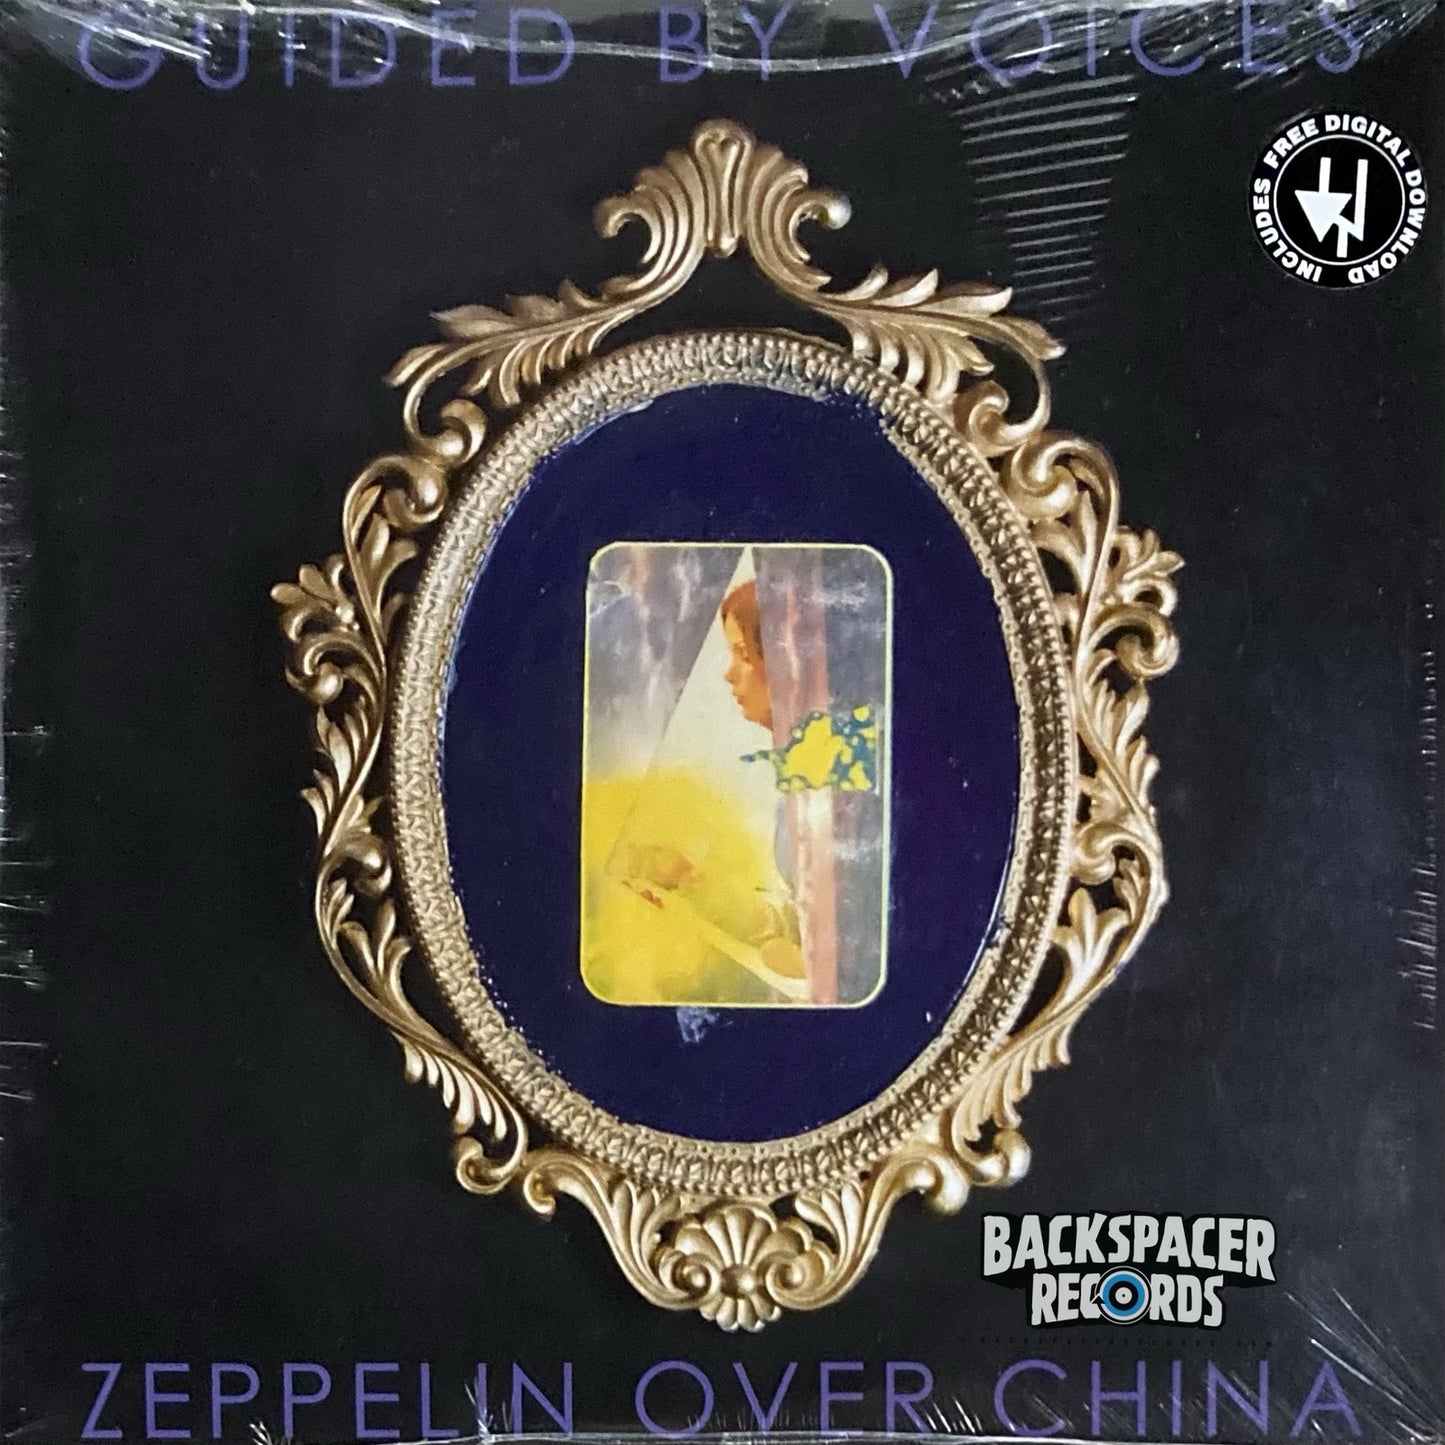 Guided By Voices – Zeppelin Over China 2-LP (Sealed)